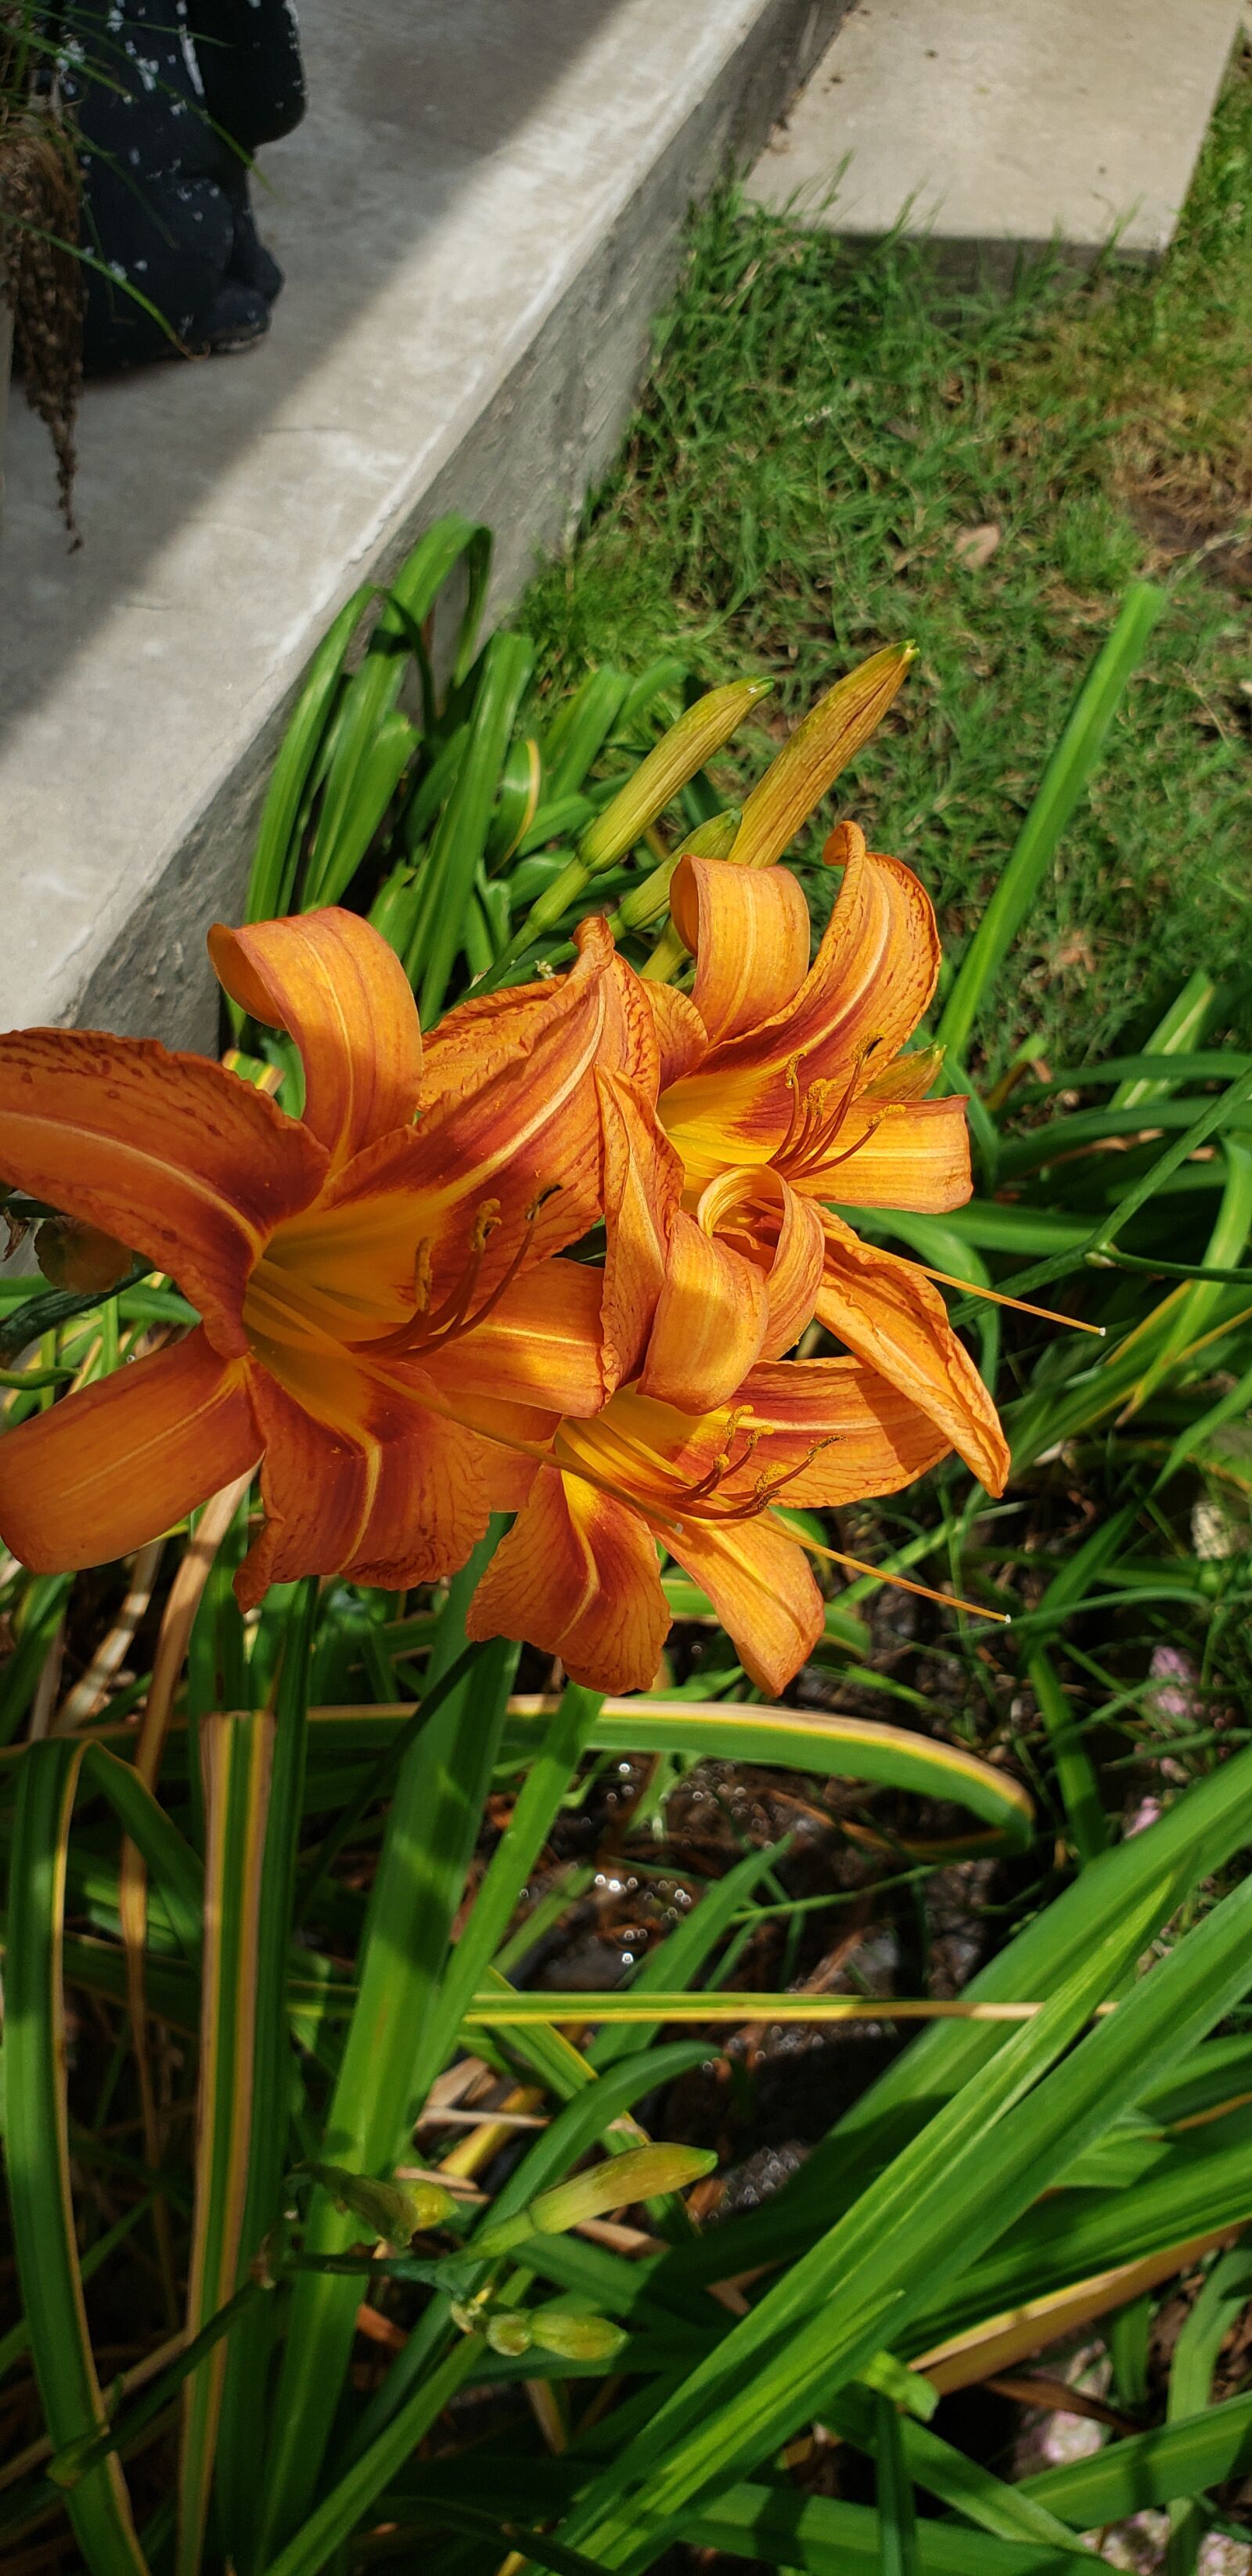 Samsung Galaxy S9 sample photo. Golden, tiger, lily photography